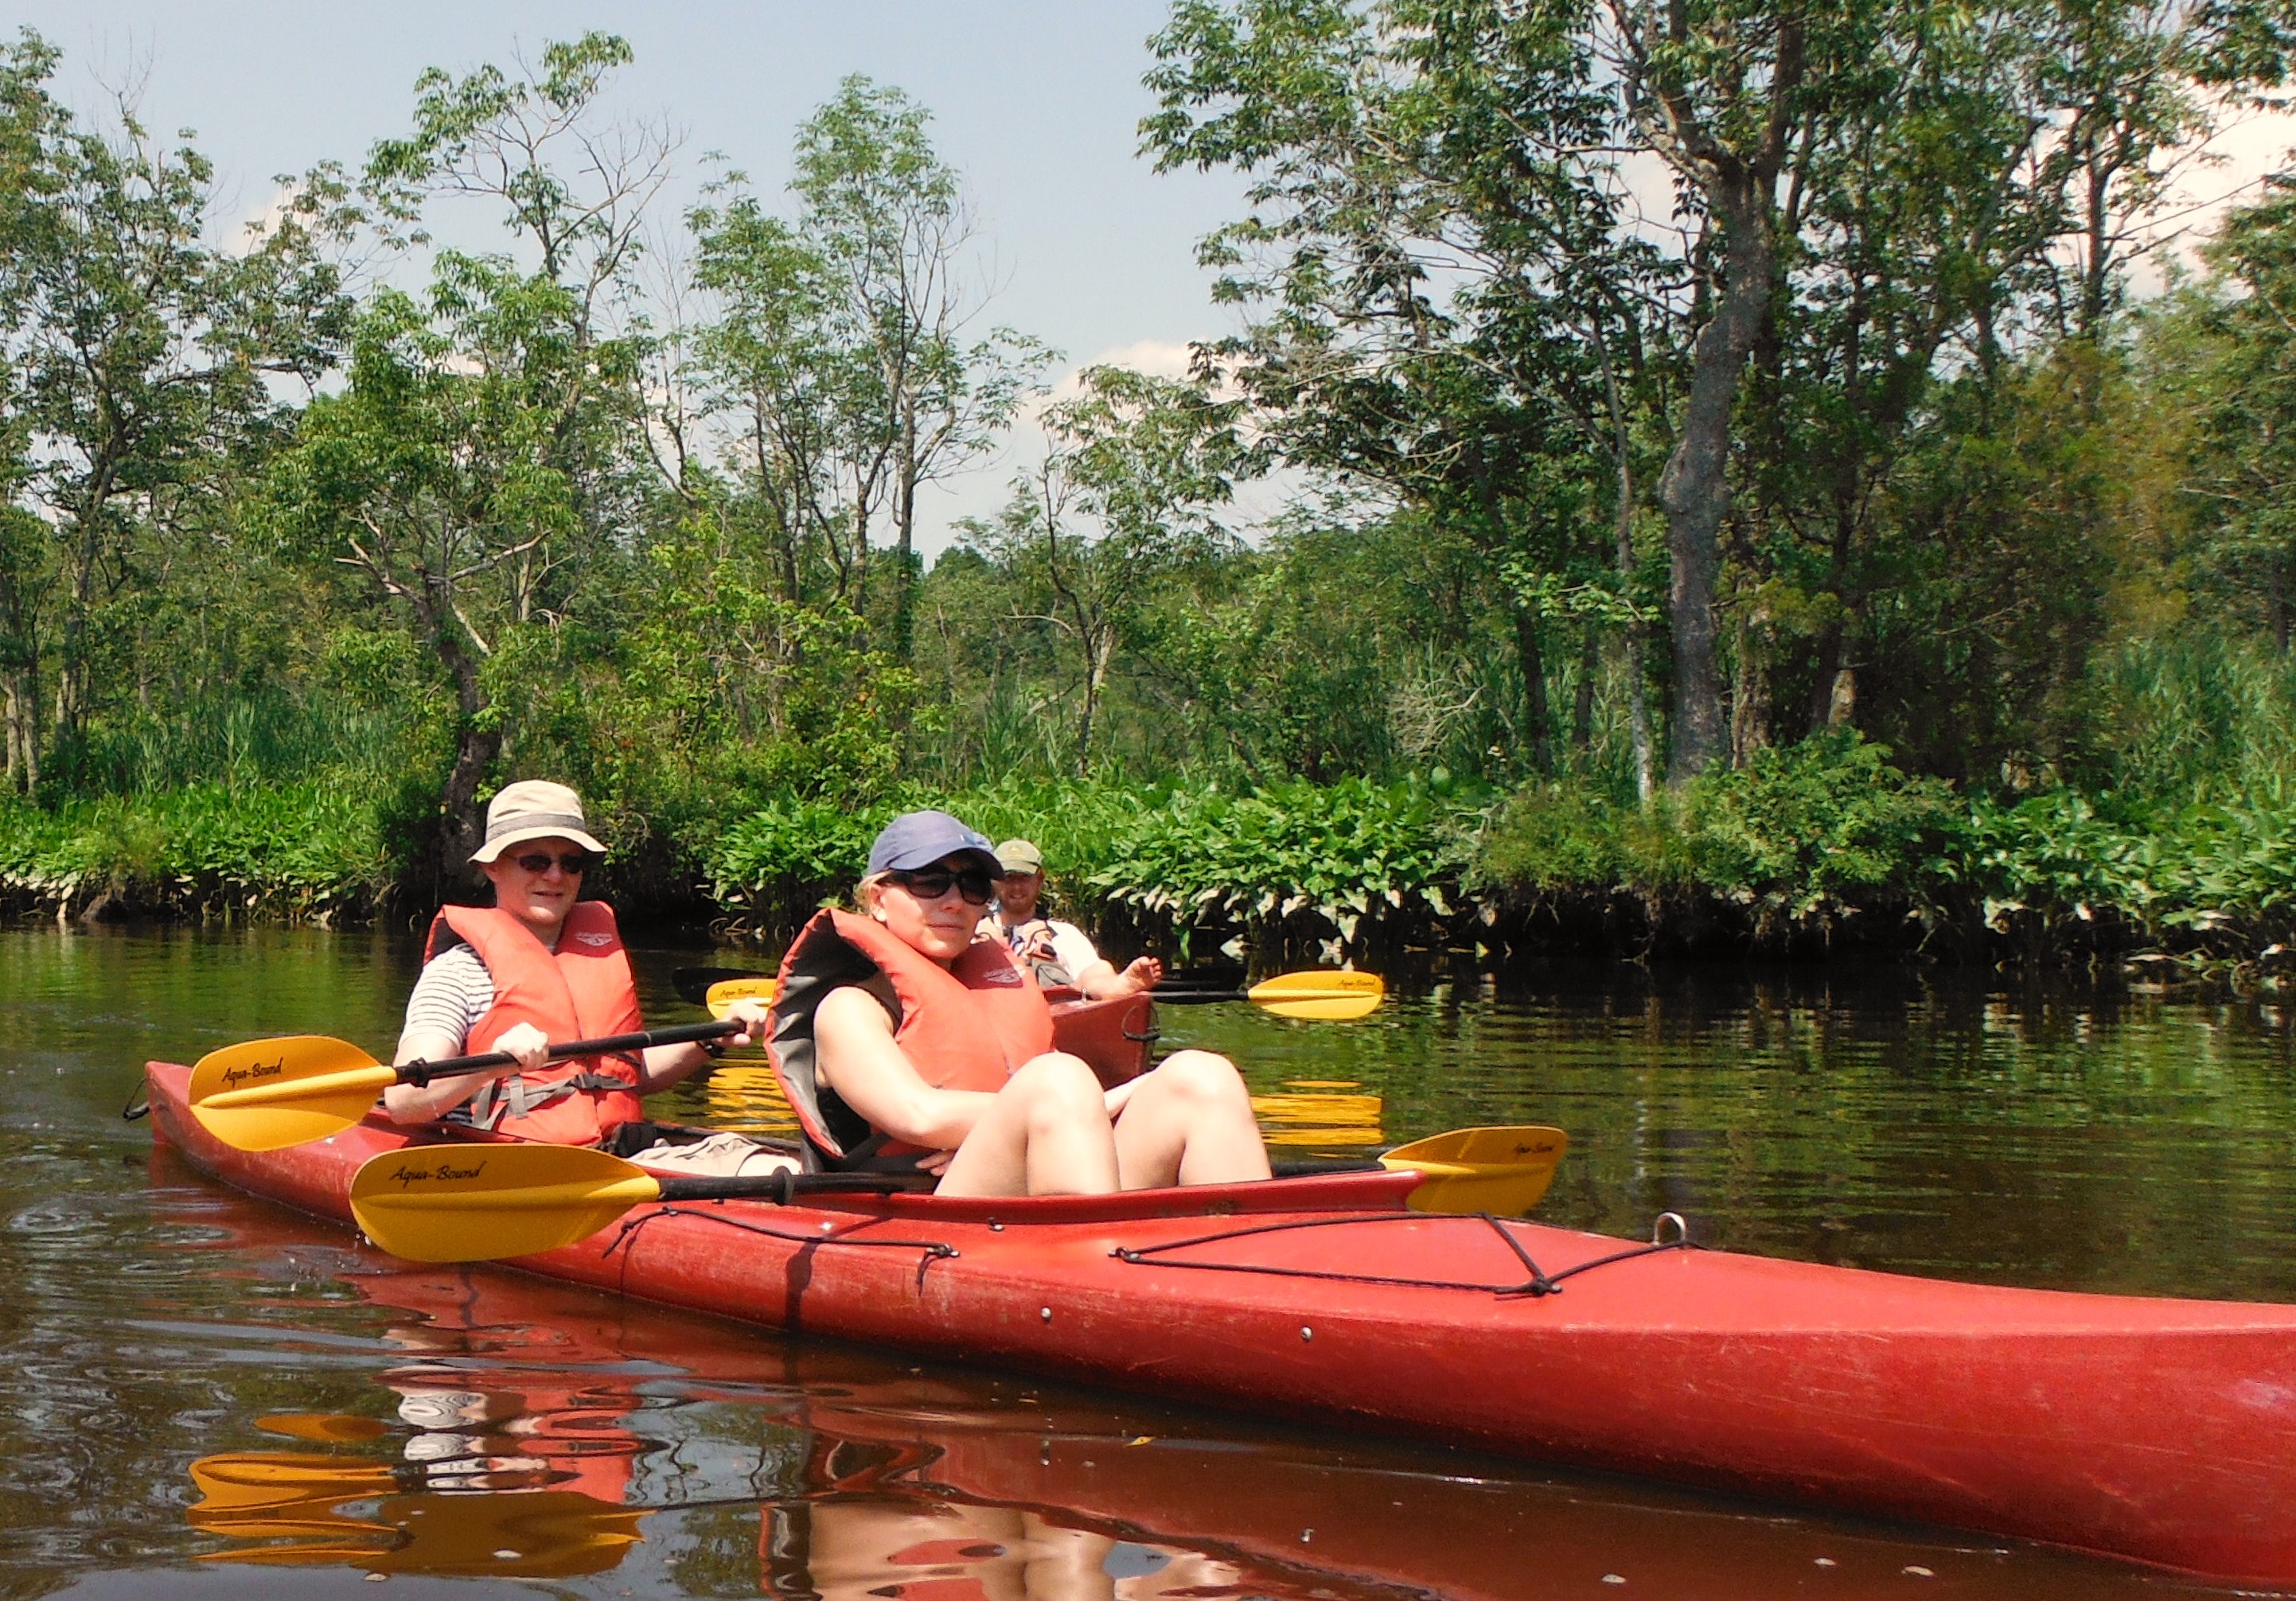 These visitors are exploring the Chicone paddle.